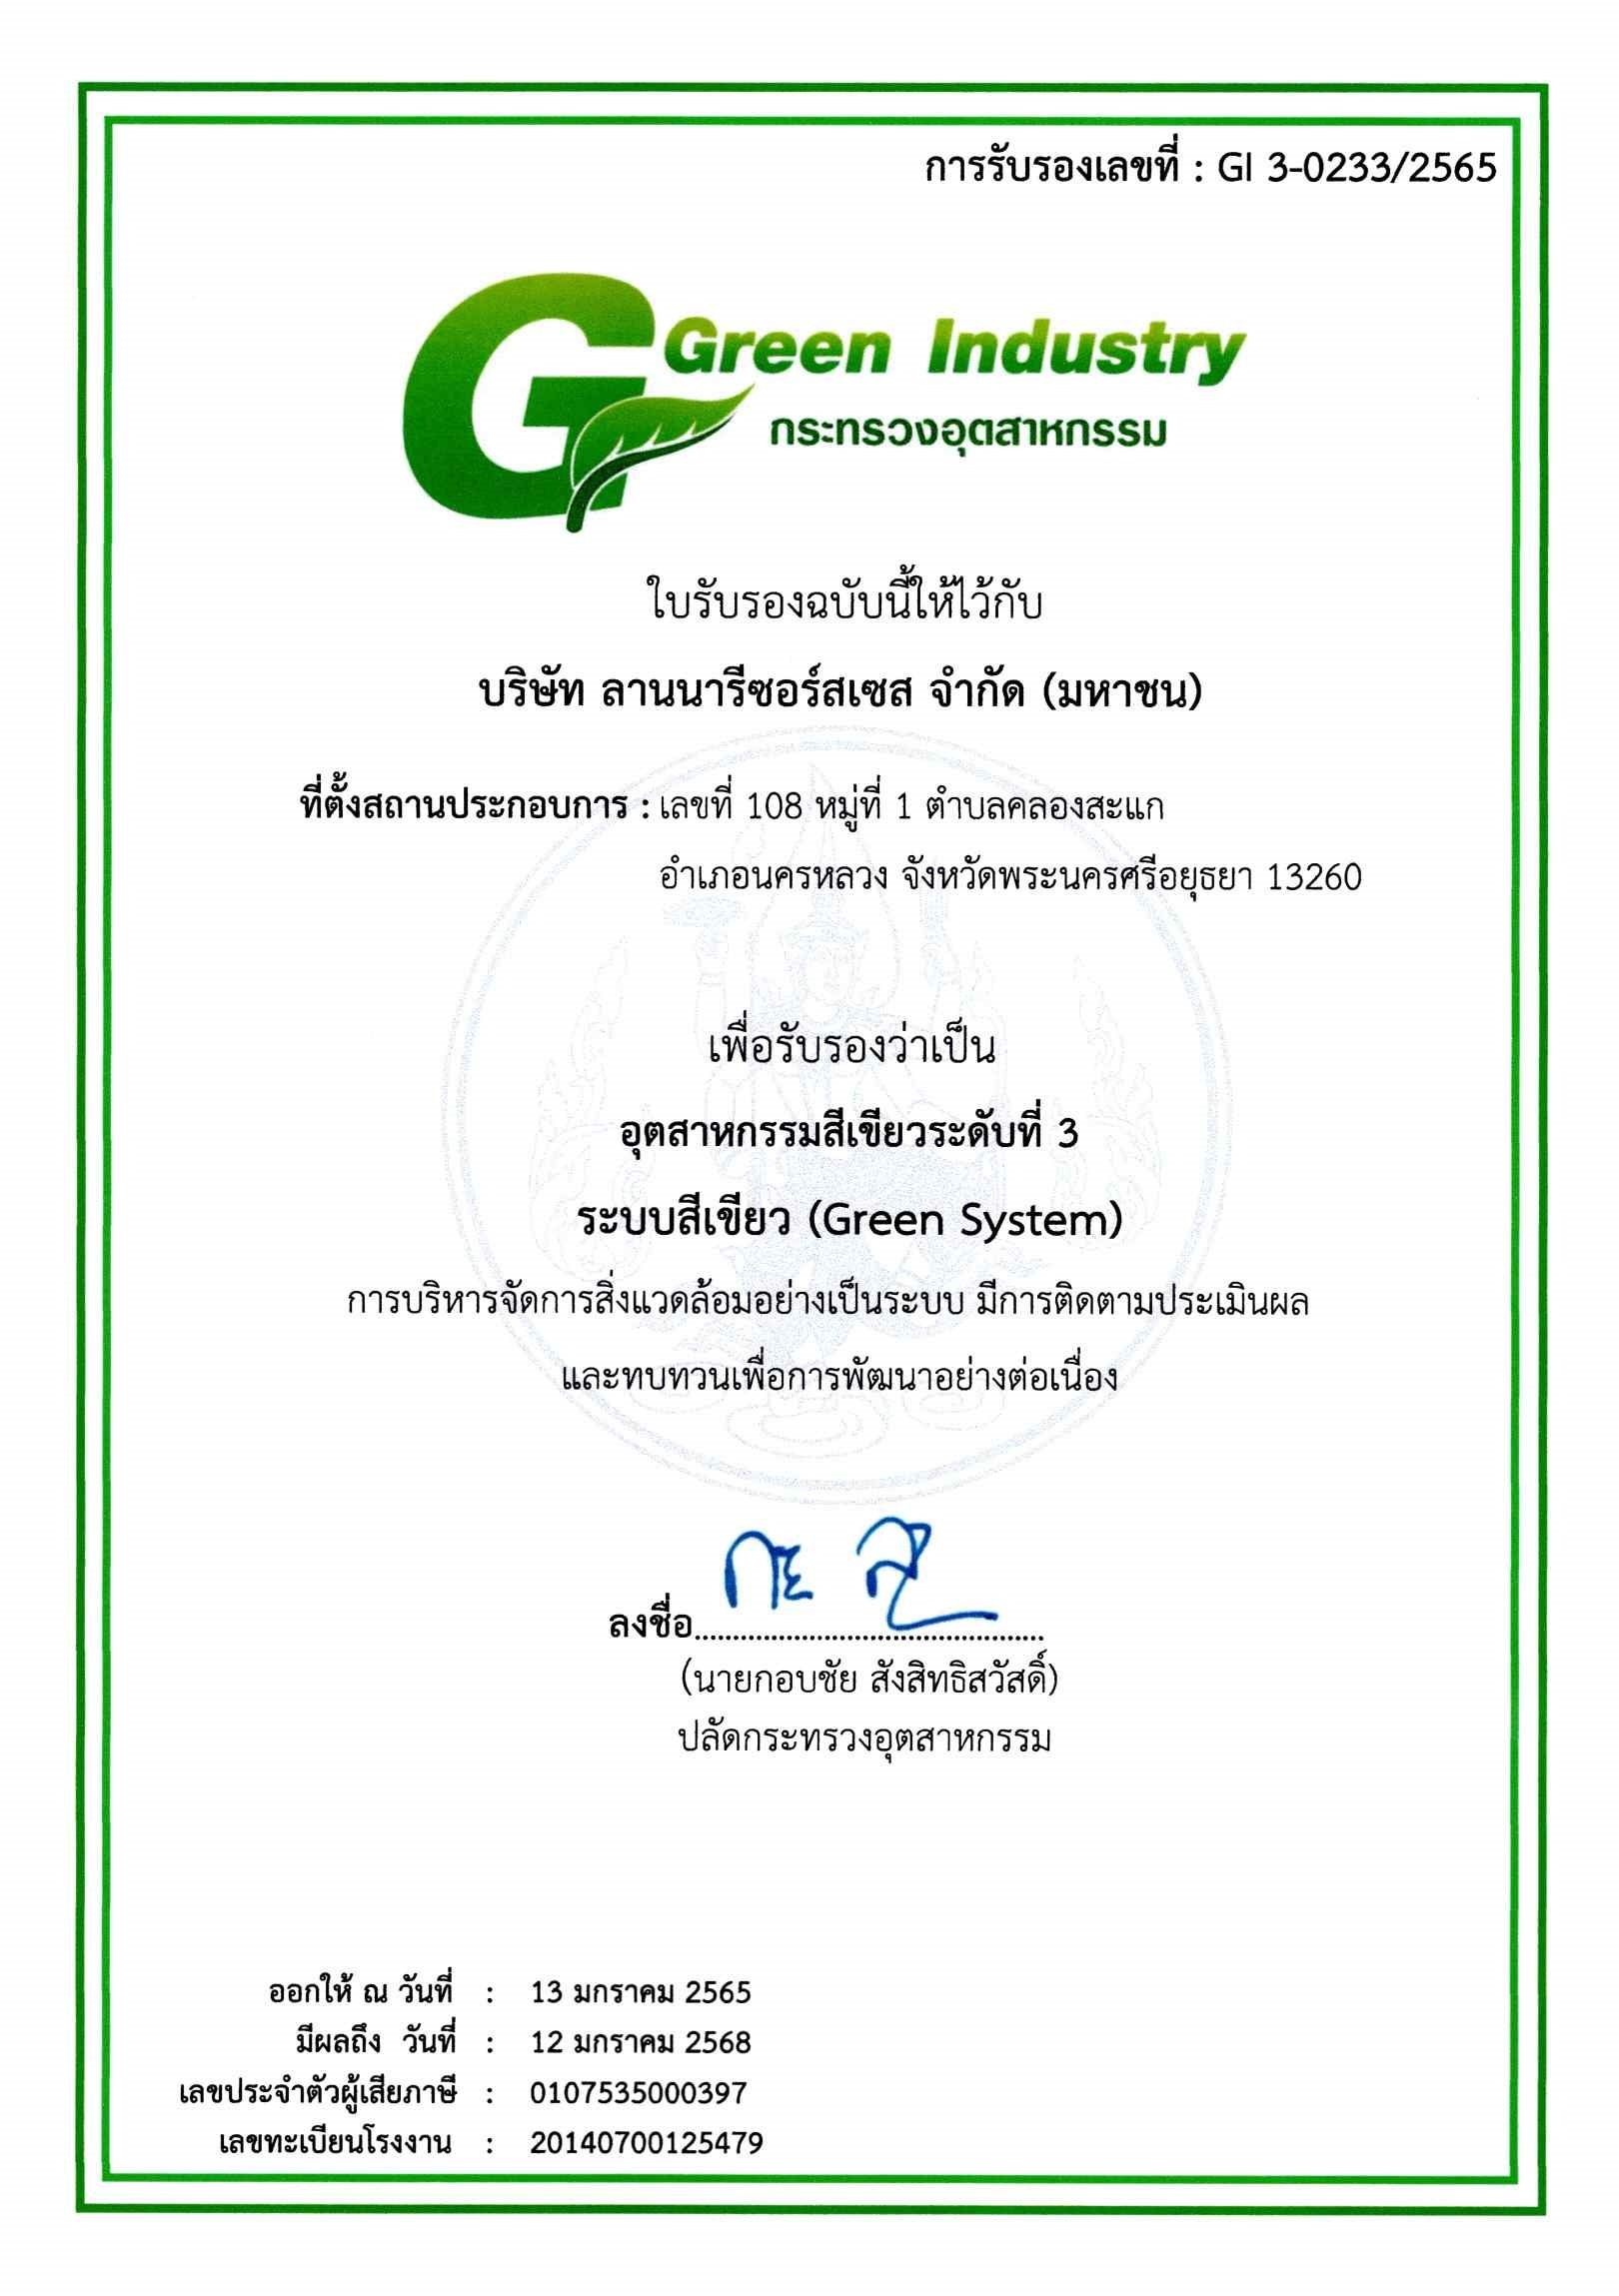 Green Industry Accreditation Level 3 (Green System)